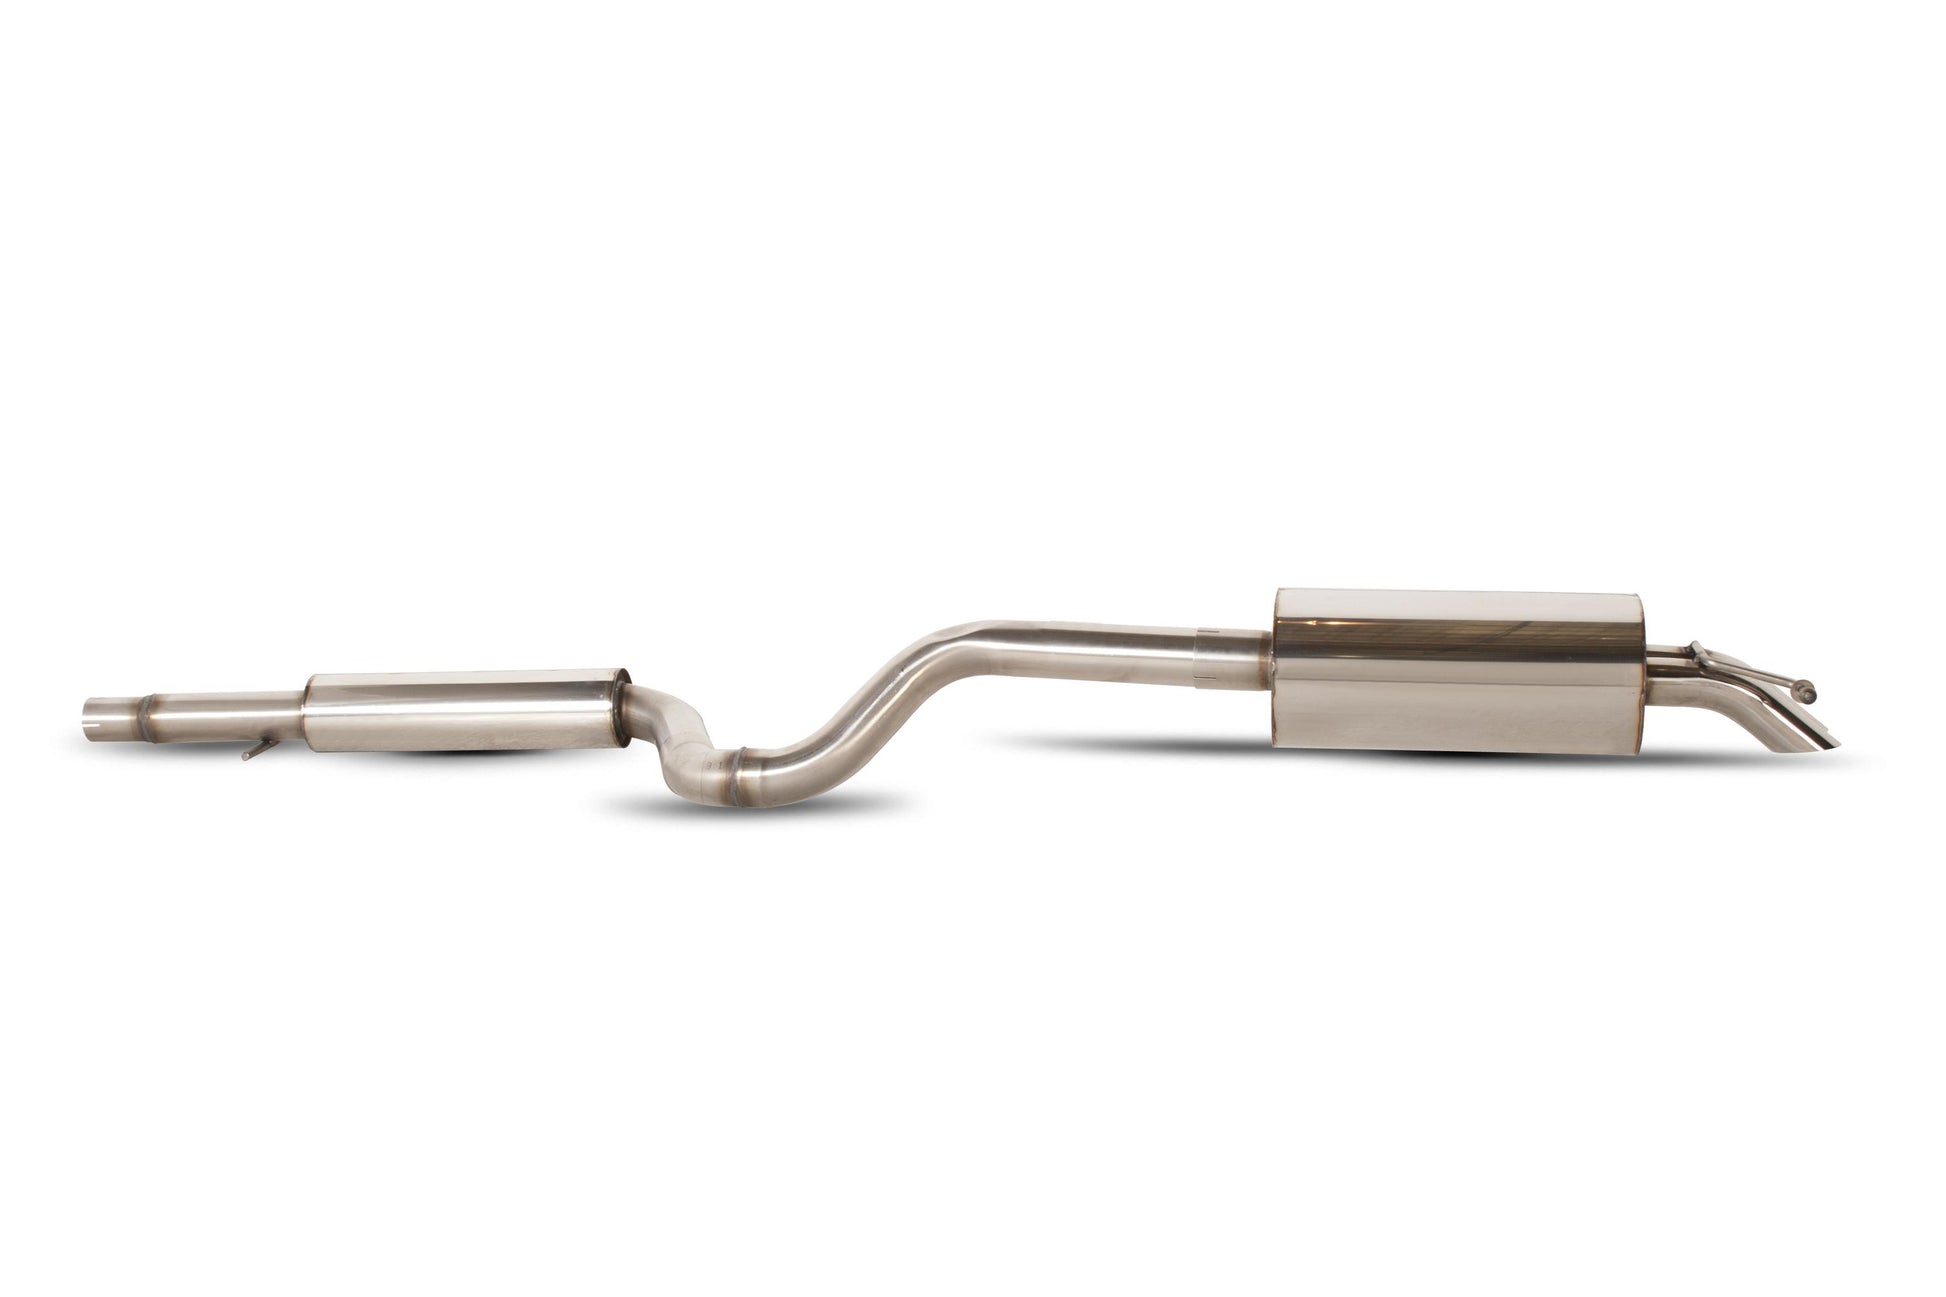 Scorpion Resonated Cat Back Exhaust System (Discrete Twin Tip) - Volkswagen Golf MK4 All excluding 2.3 V5 & 4WD models